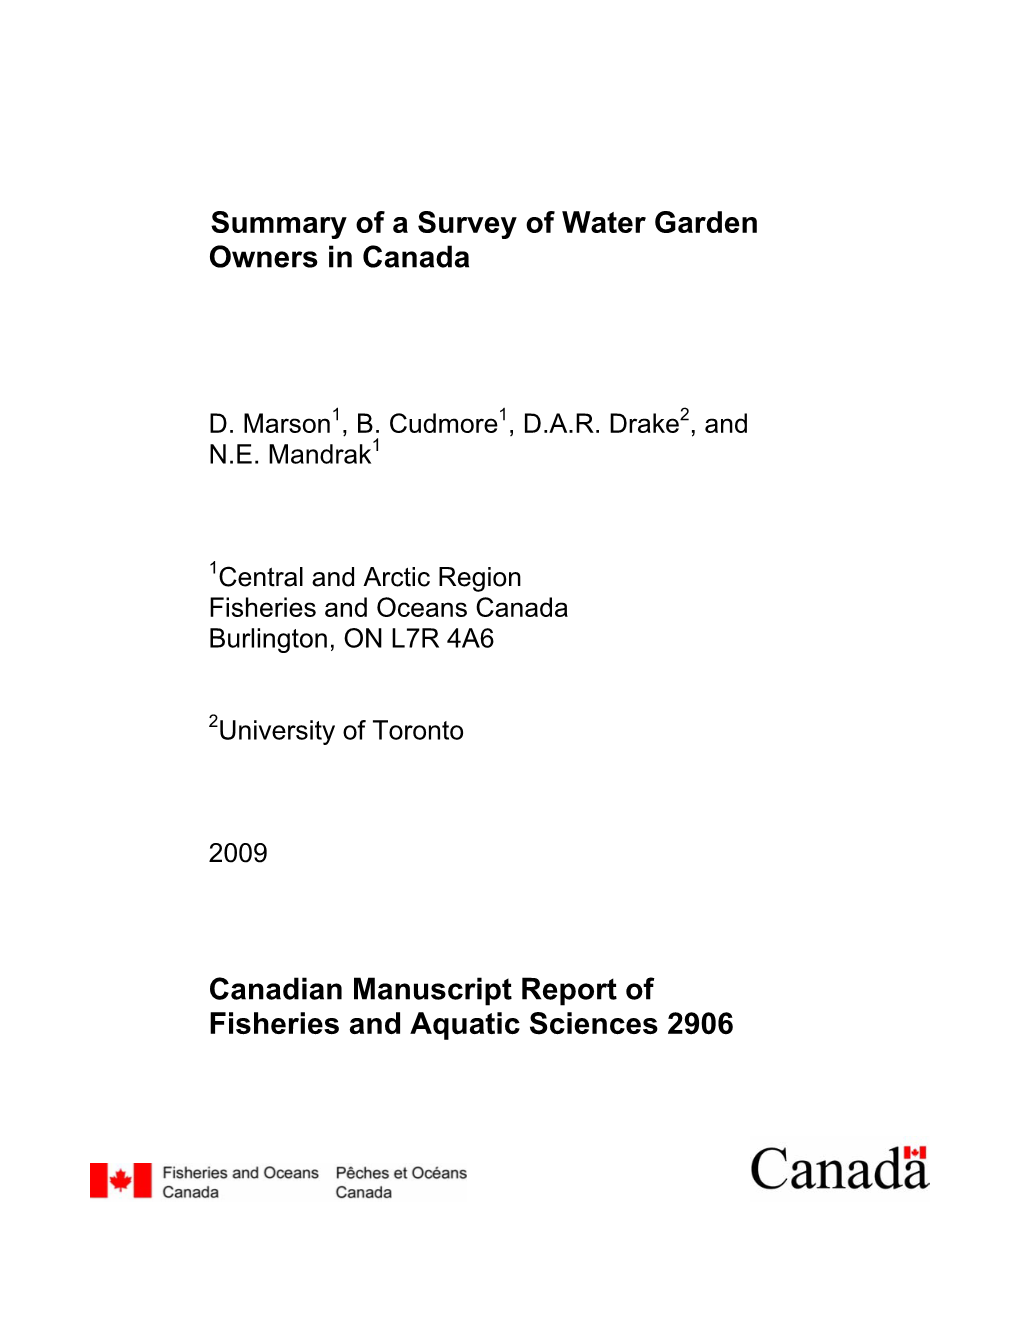 Summary of a Survey of Water Garden Owners in Canada Canadian